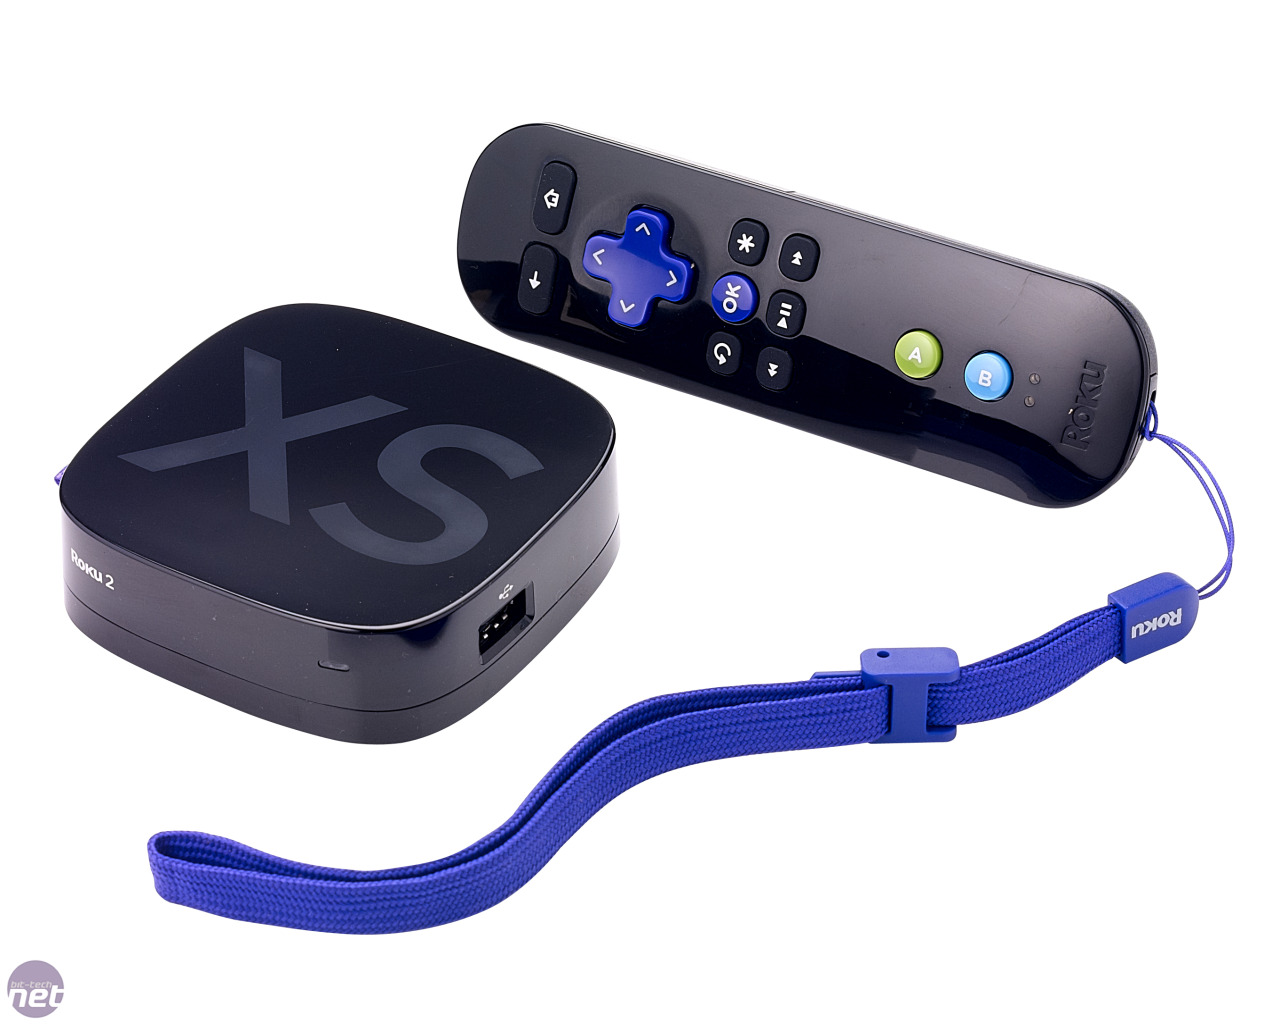 Does Roku Player Come With Hdmi Cable